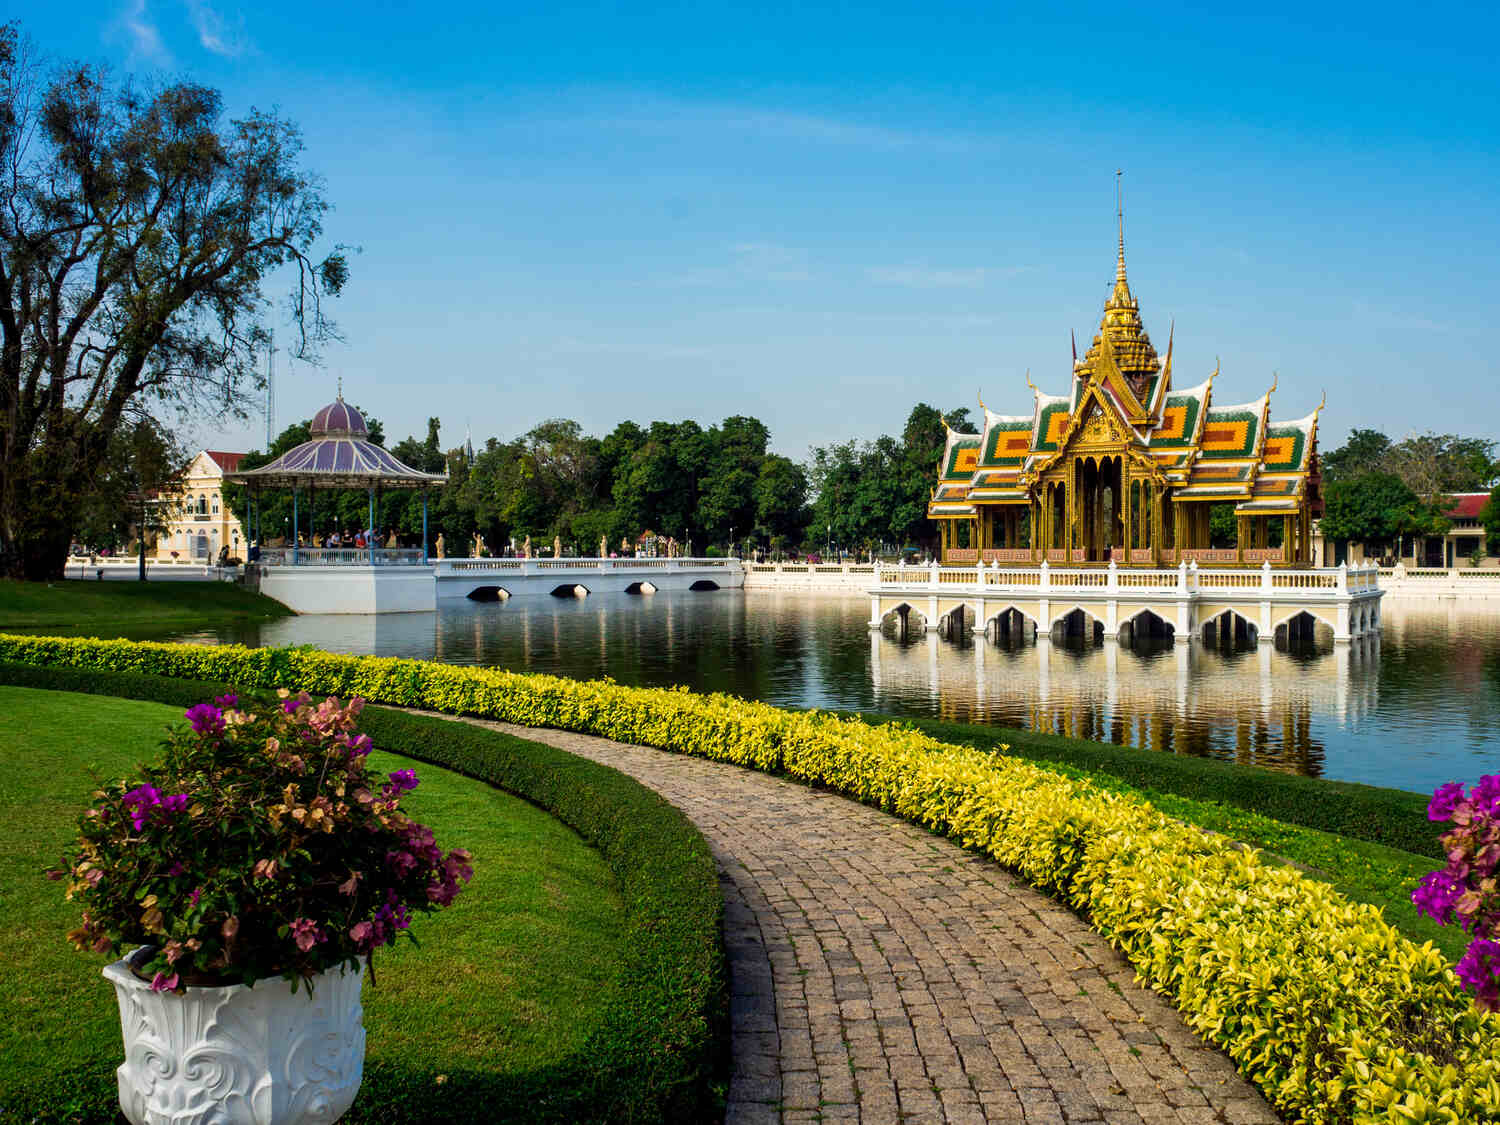 A scenic park with a large pond, vibrant flower beds, and a traditional Thai pavilion in the distance.